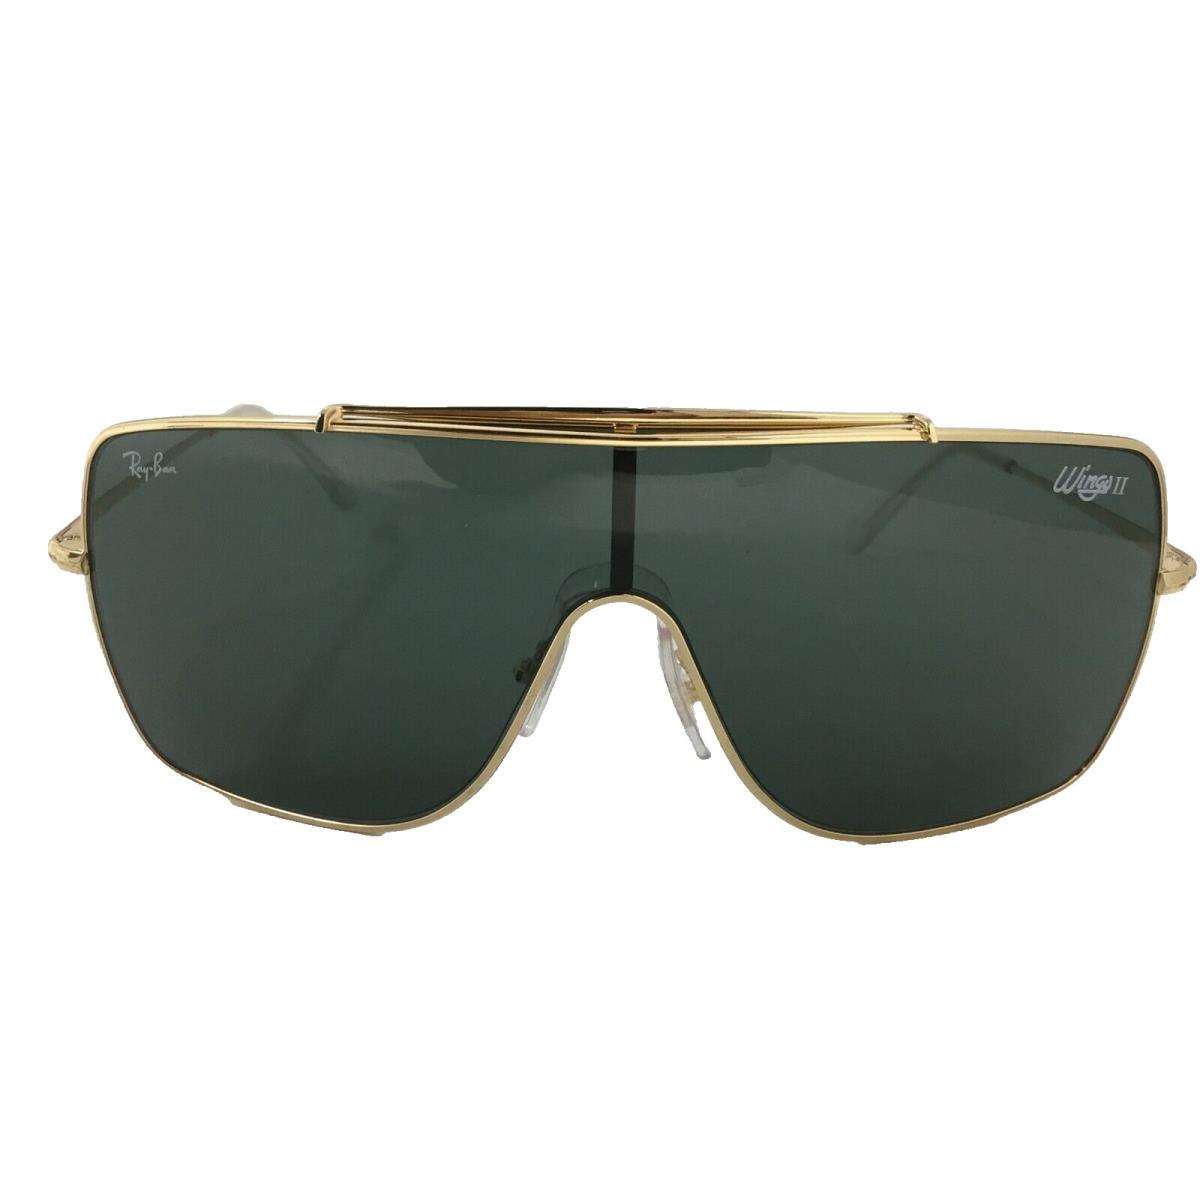 Ray-ban Unisex Gold Frame Green Tinted Lens Sunglasses Wings 1499